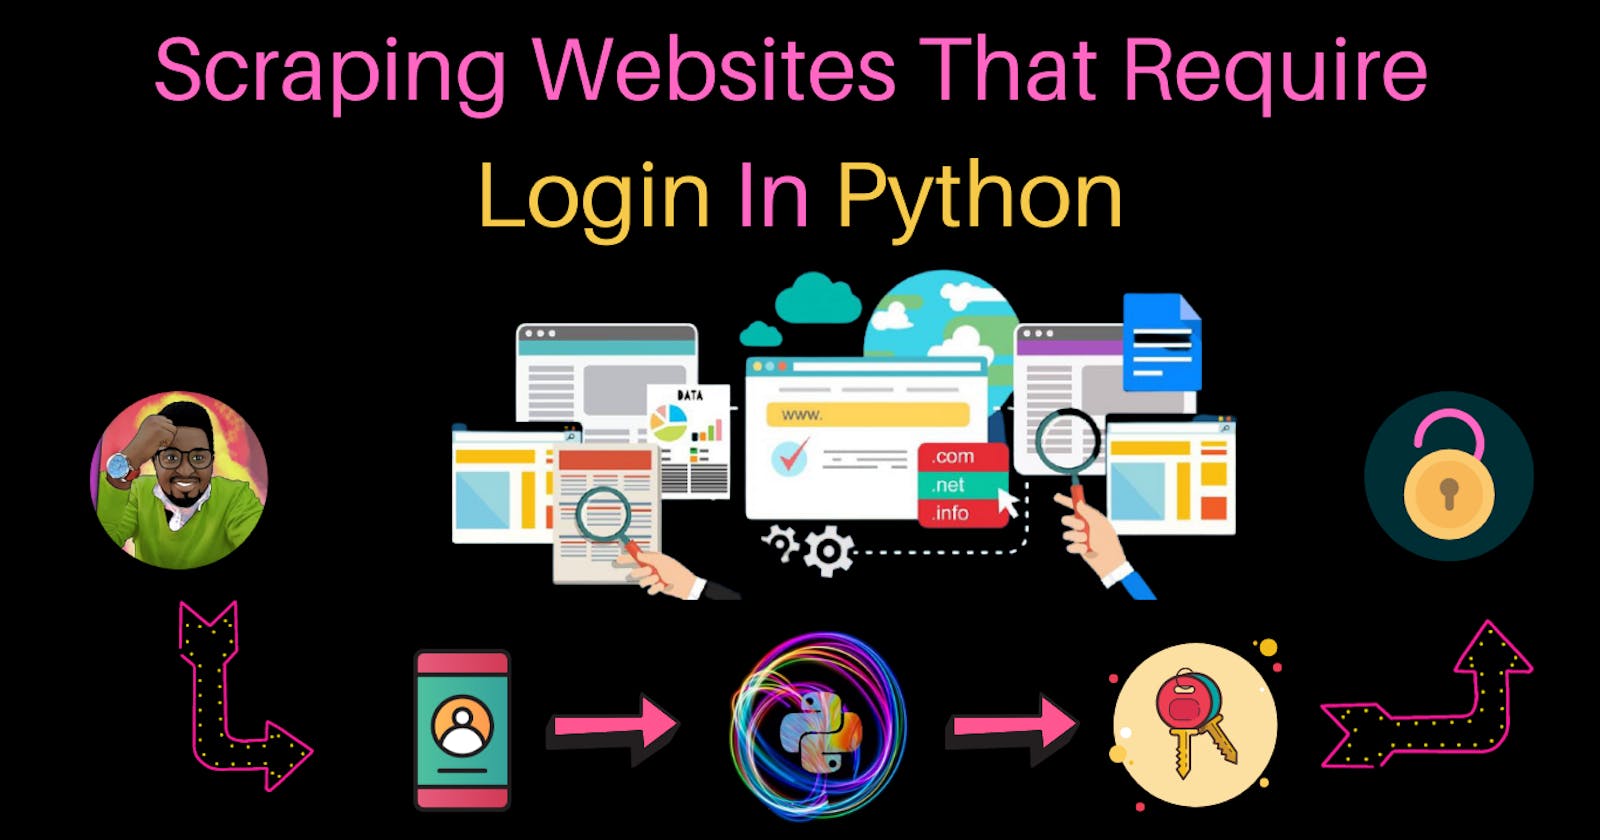 Scraping Websites That Require Login In Python